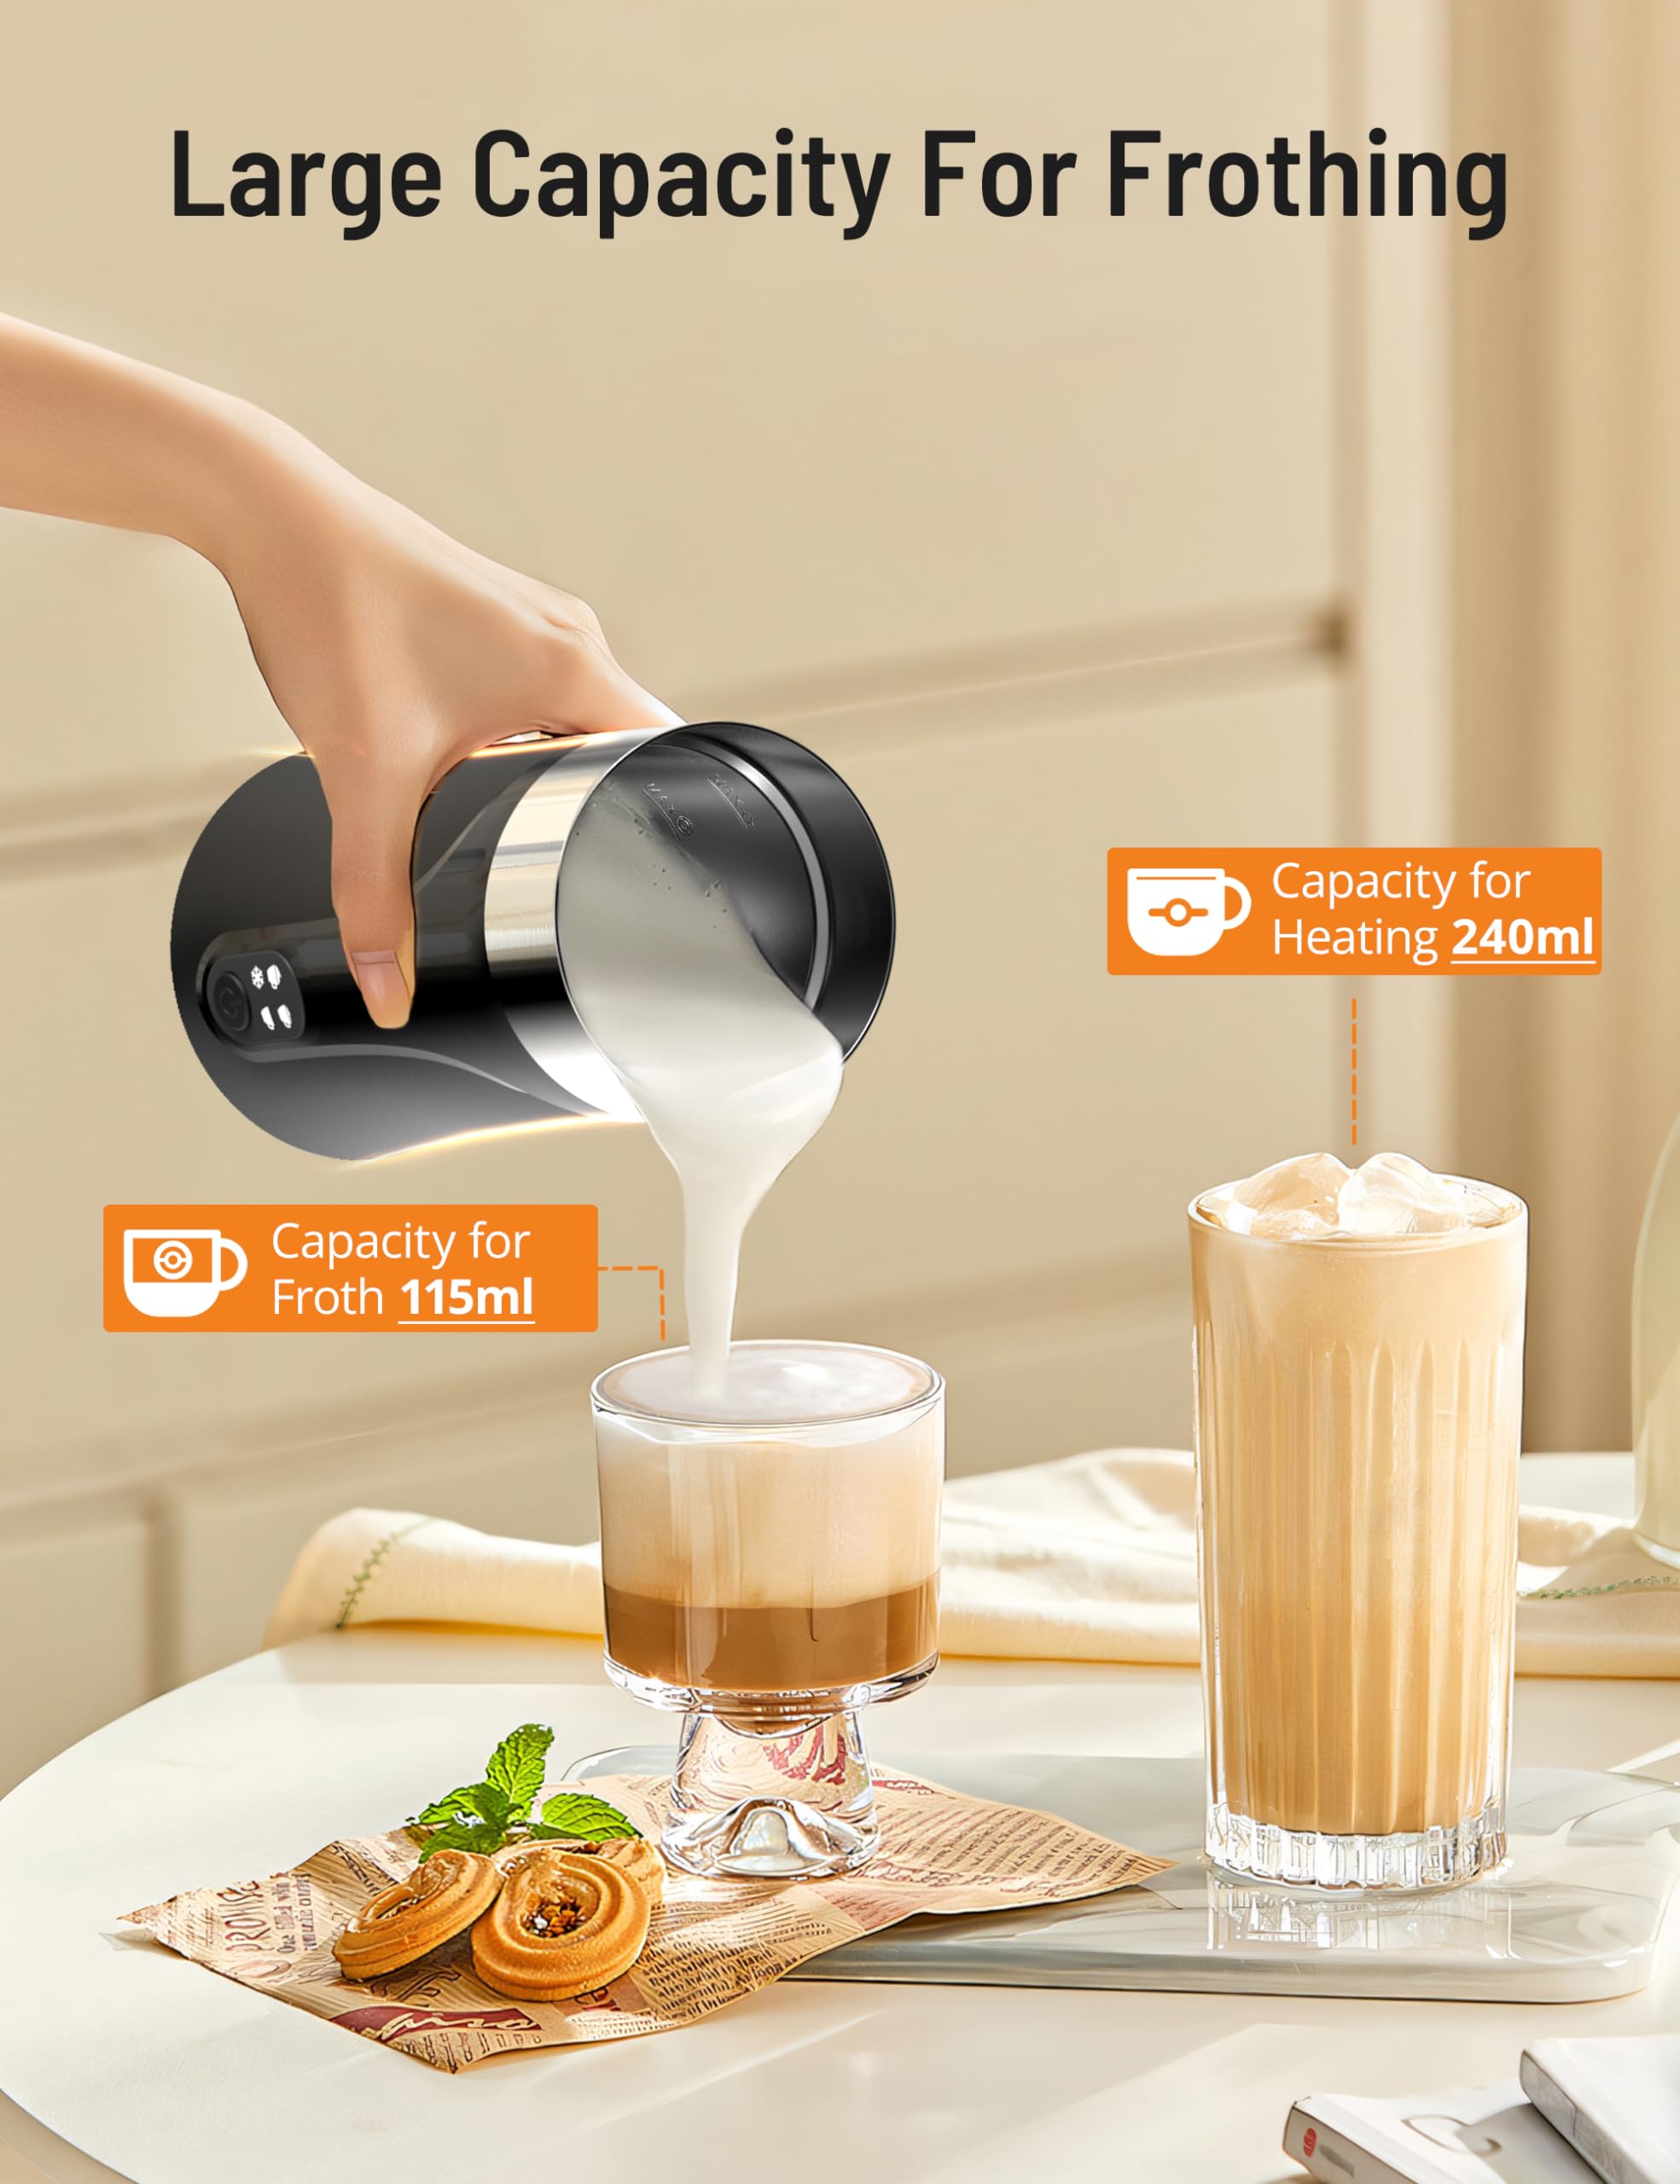 KLEAH 4 in 1 Milk Frother and Steamer, Non-Slip Design, Stainless Steel, Silent Operation Hot & Cold Milk Steamer, Auto Shut-Off Frother for Latte, Coffee, Cappuccino, Macchiato, Easy Cleaning, 240ml